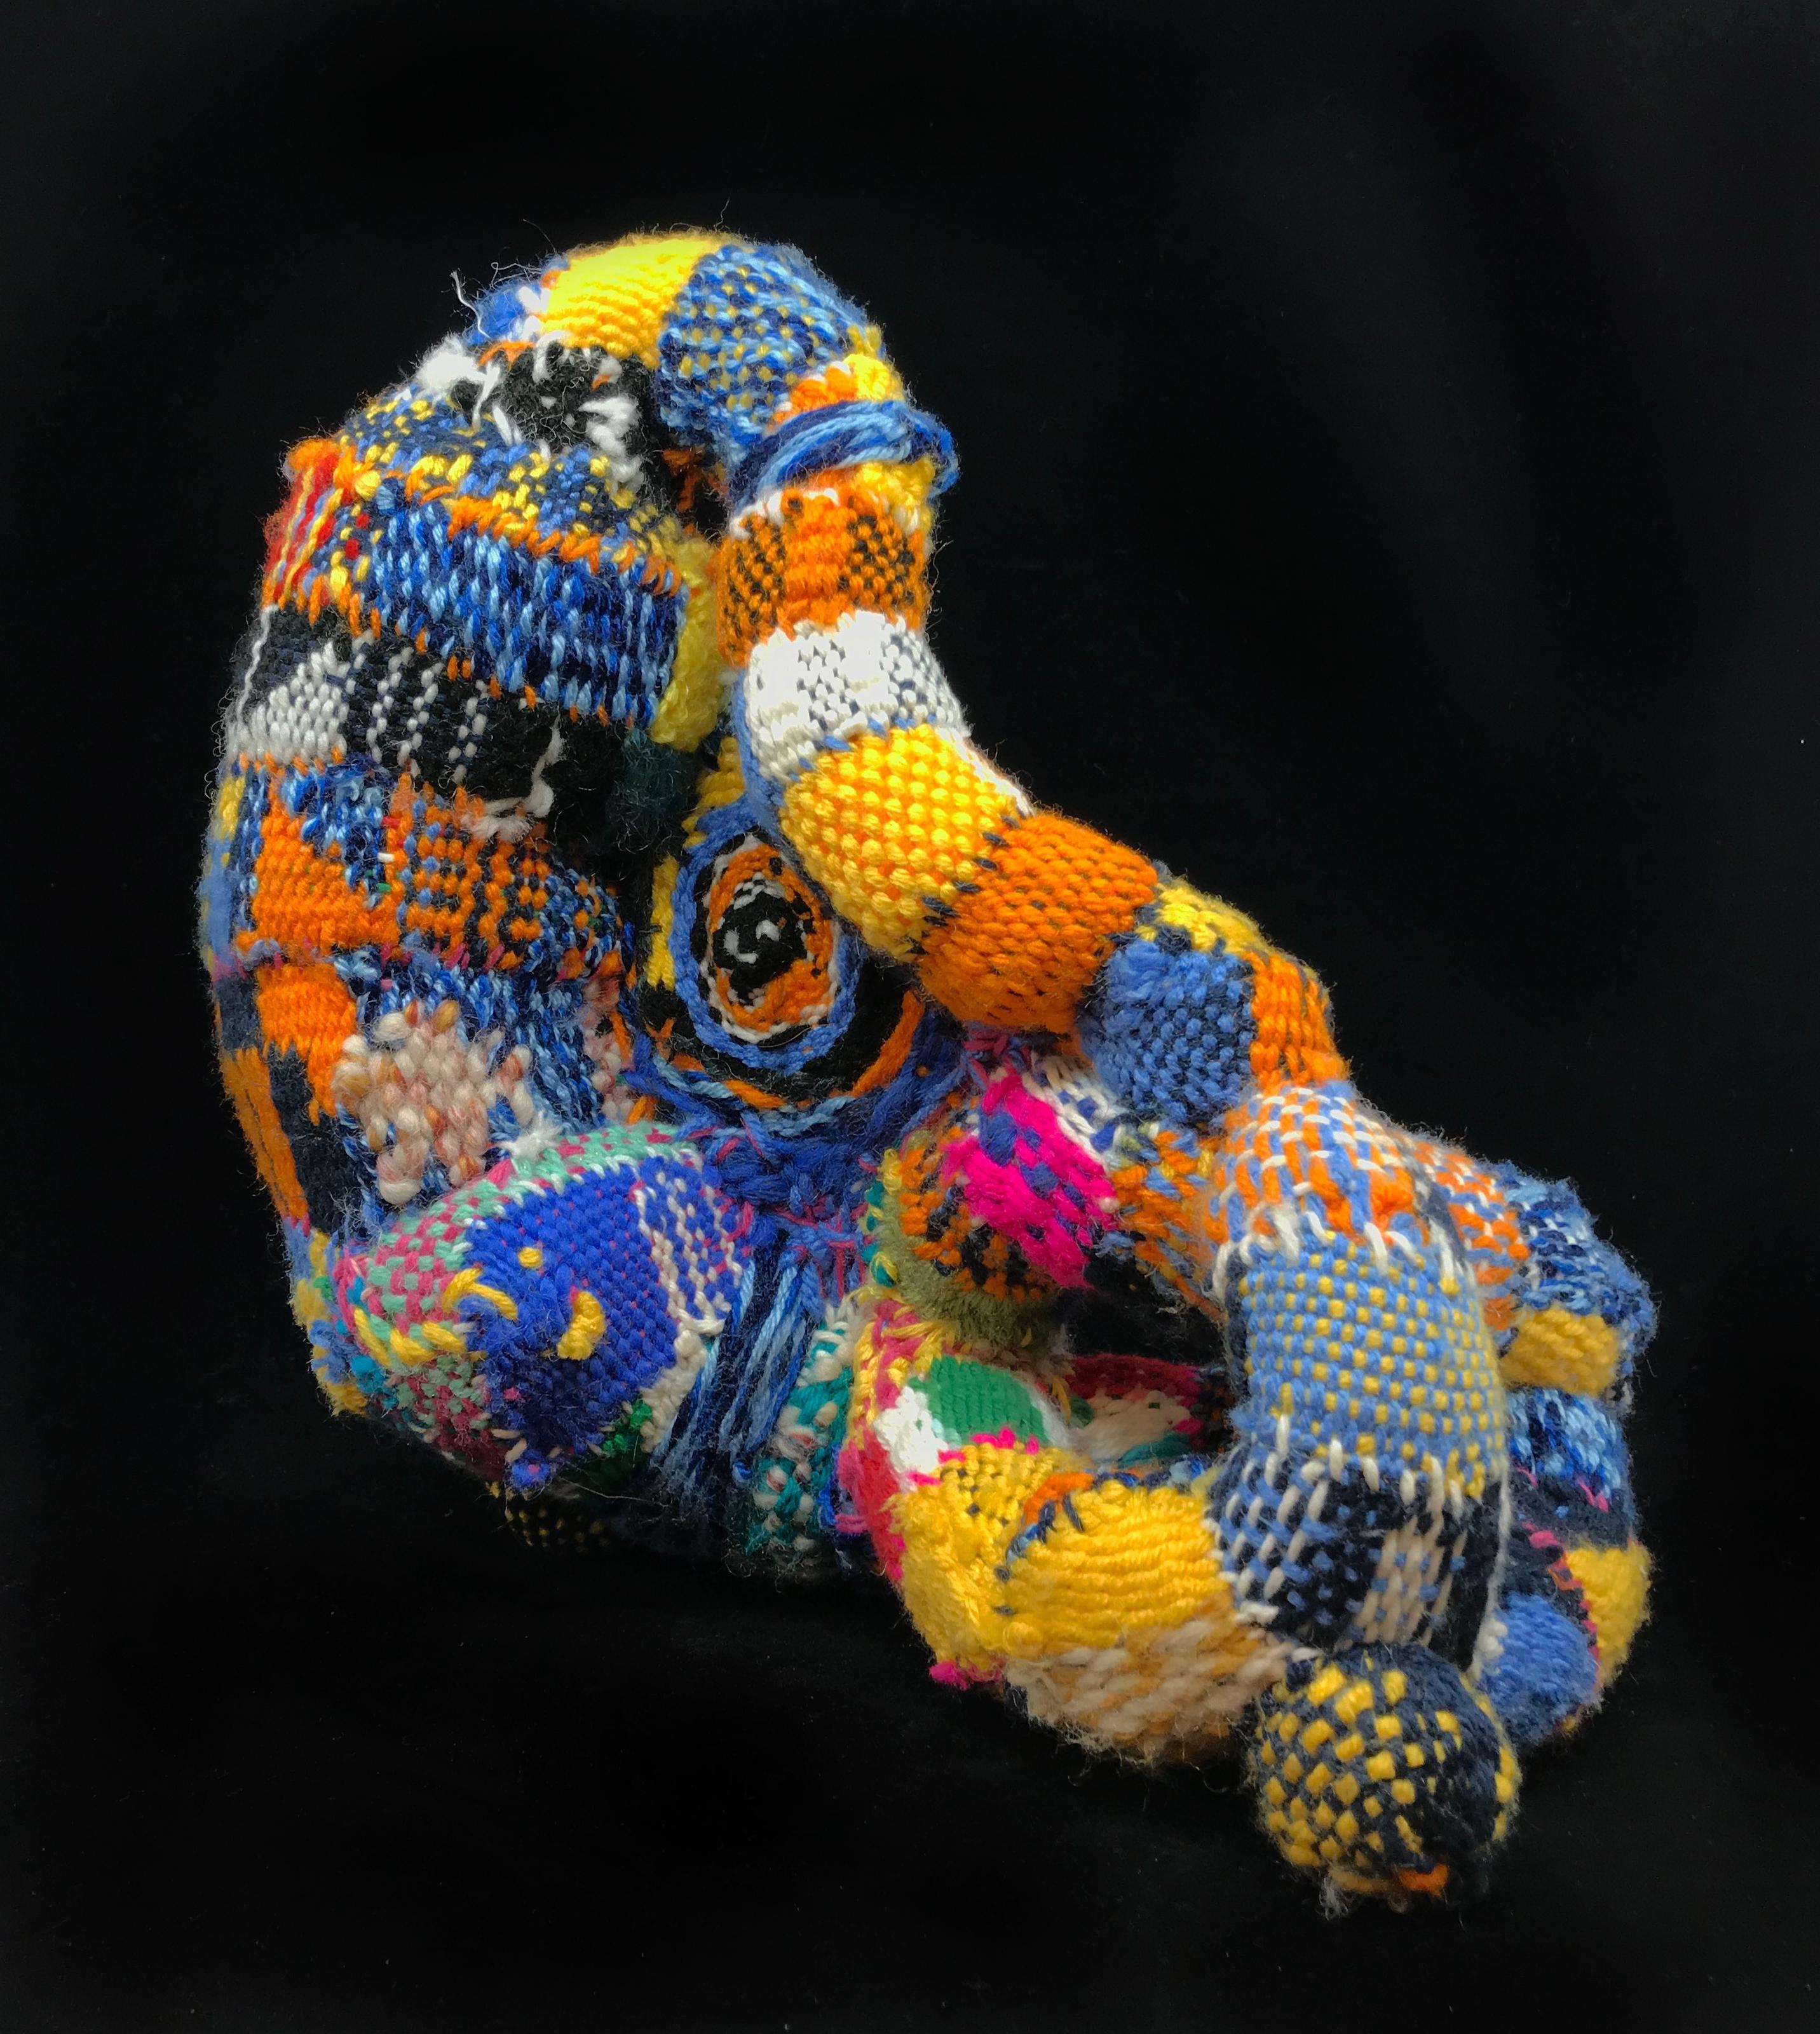 Ethan Meyer Abstract Sculpture - "Topographical Morphology", Contemporary, Hand Woven, Stitched, Textile, Color